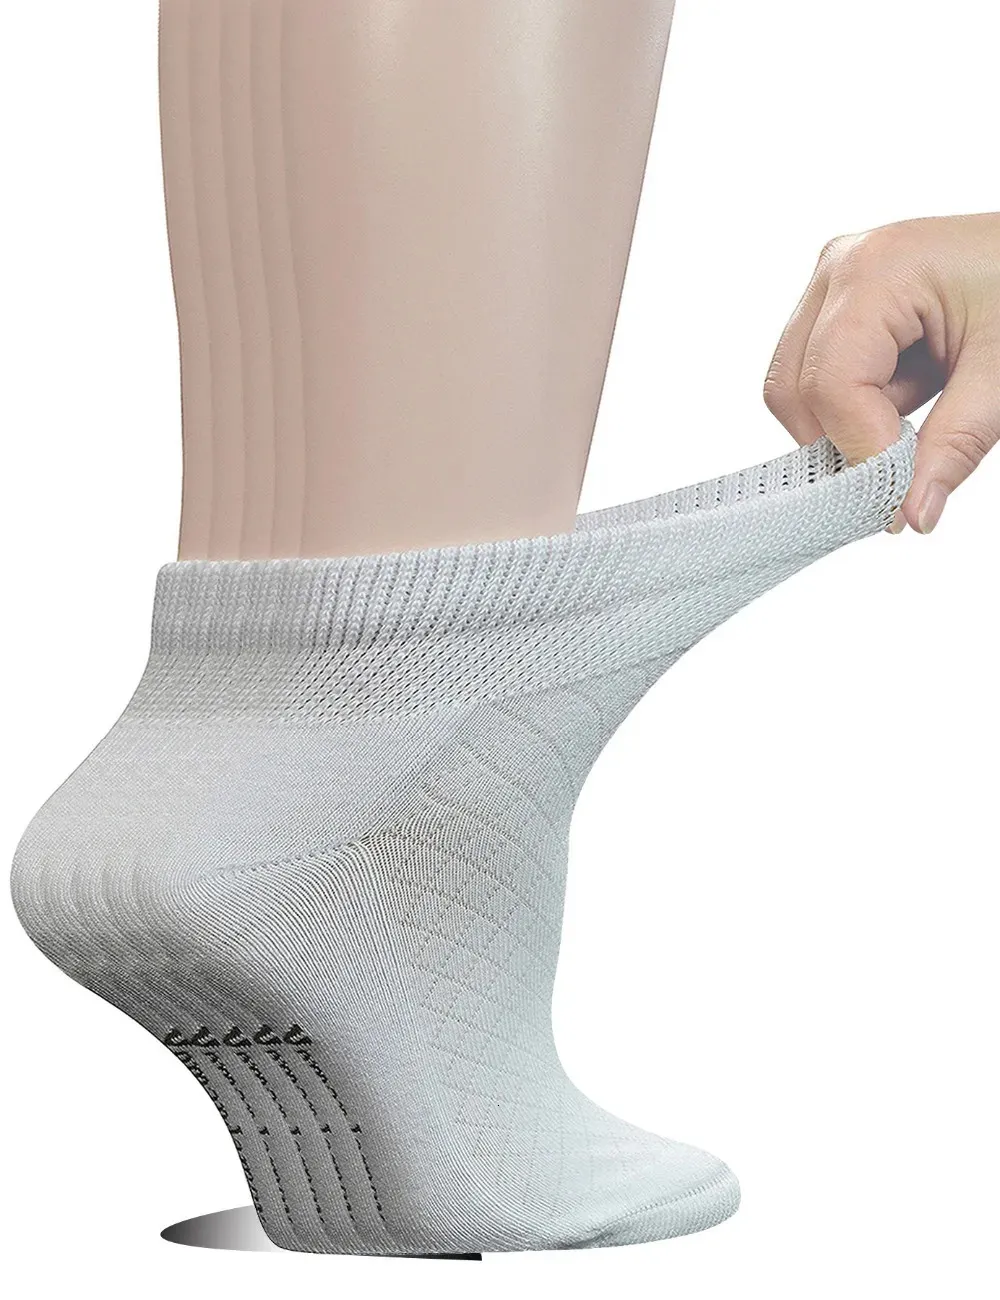 Socks Hosiery Women's 5 Pairs Cotton Ankle Breathable Mesh Diabetic Socks with Seamless Toe L Size 231215